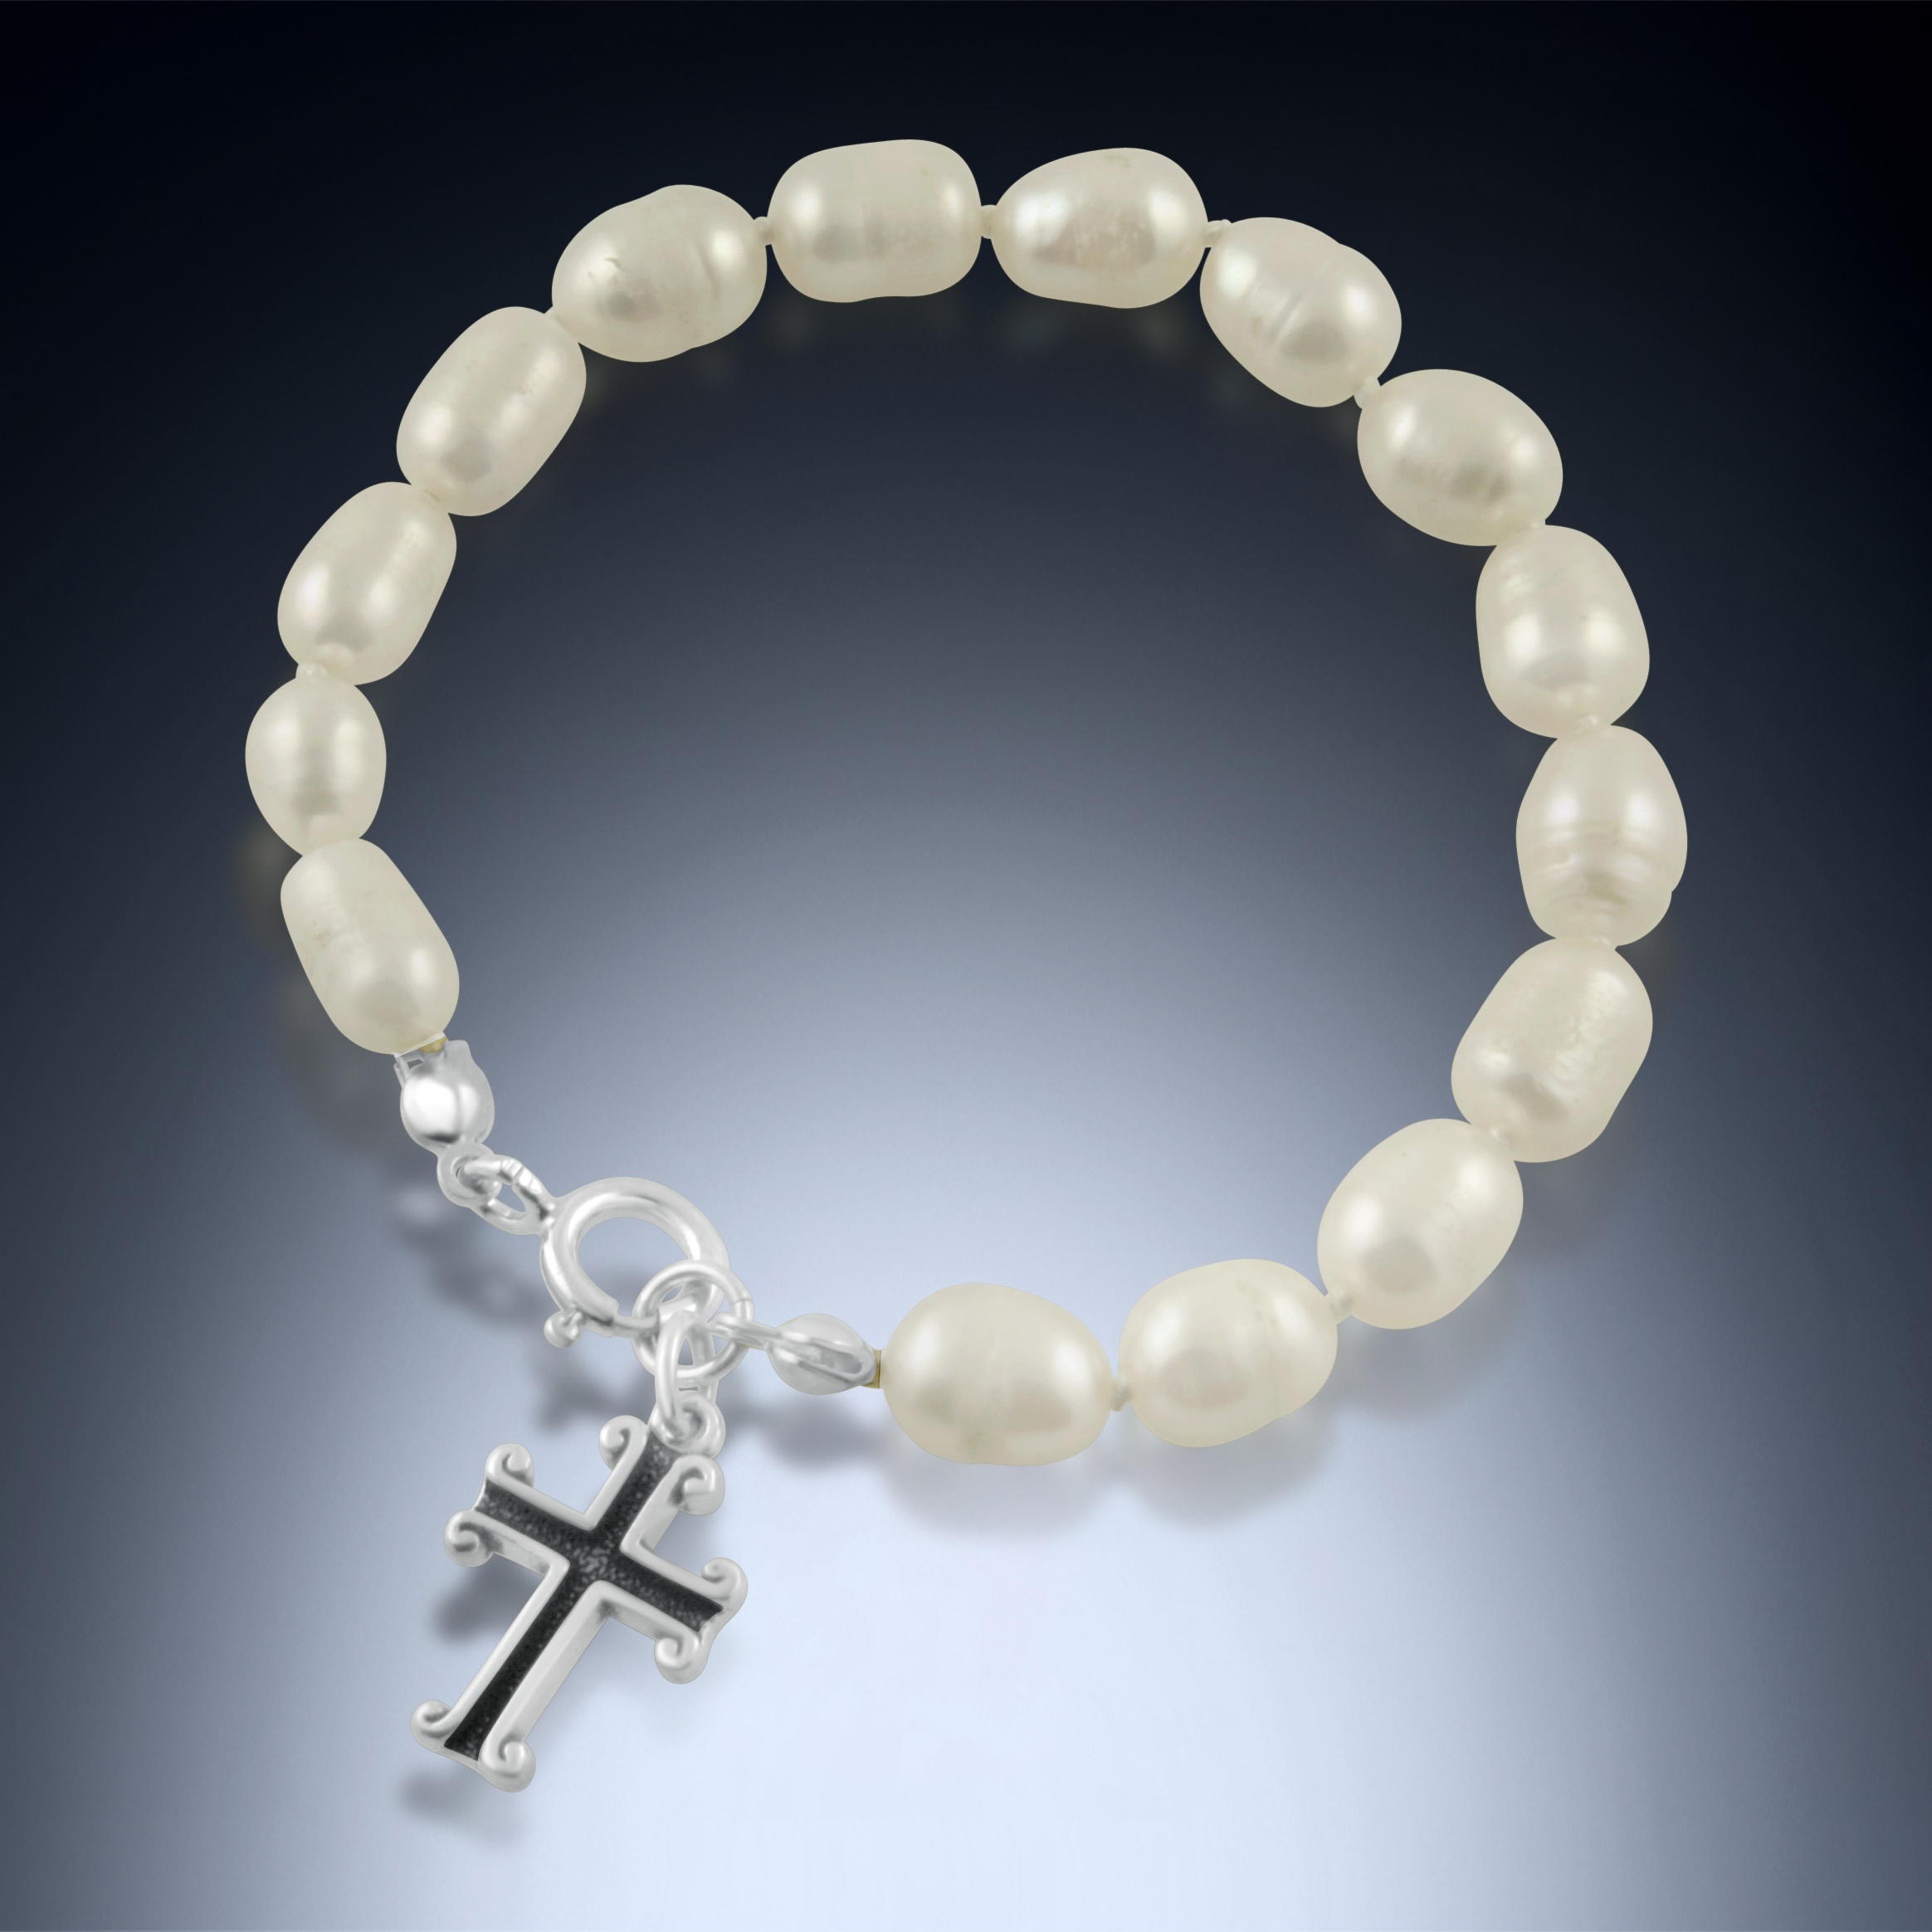 First Holy Communion White Slip Knot Bracelet. Child Size. Made in Italy.